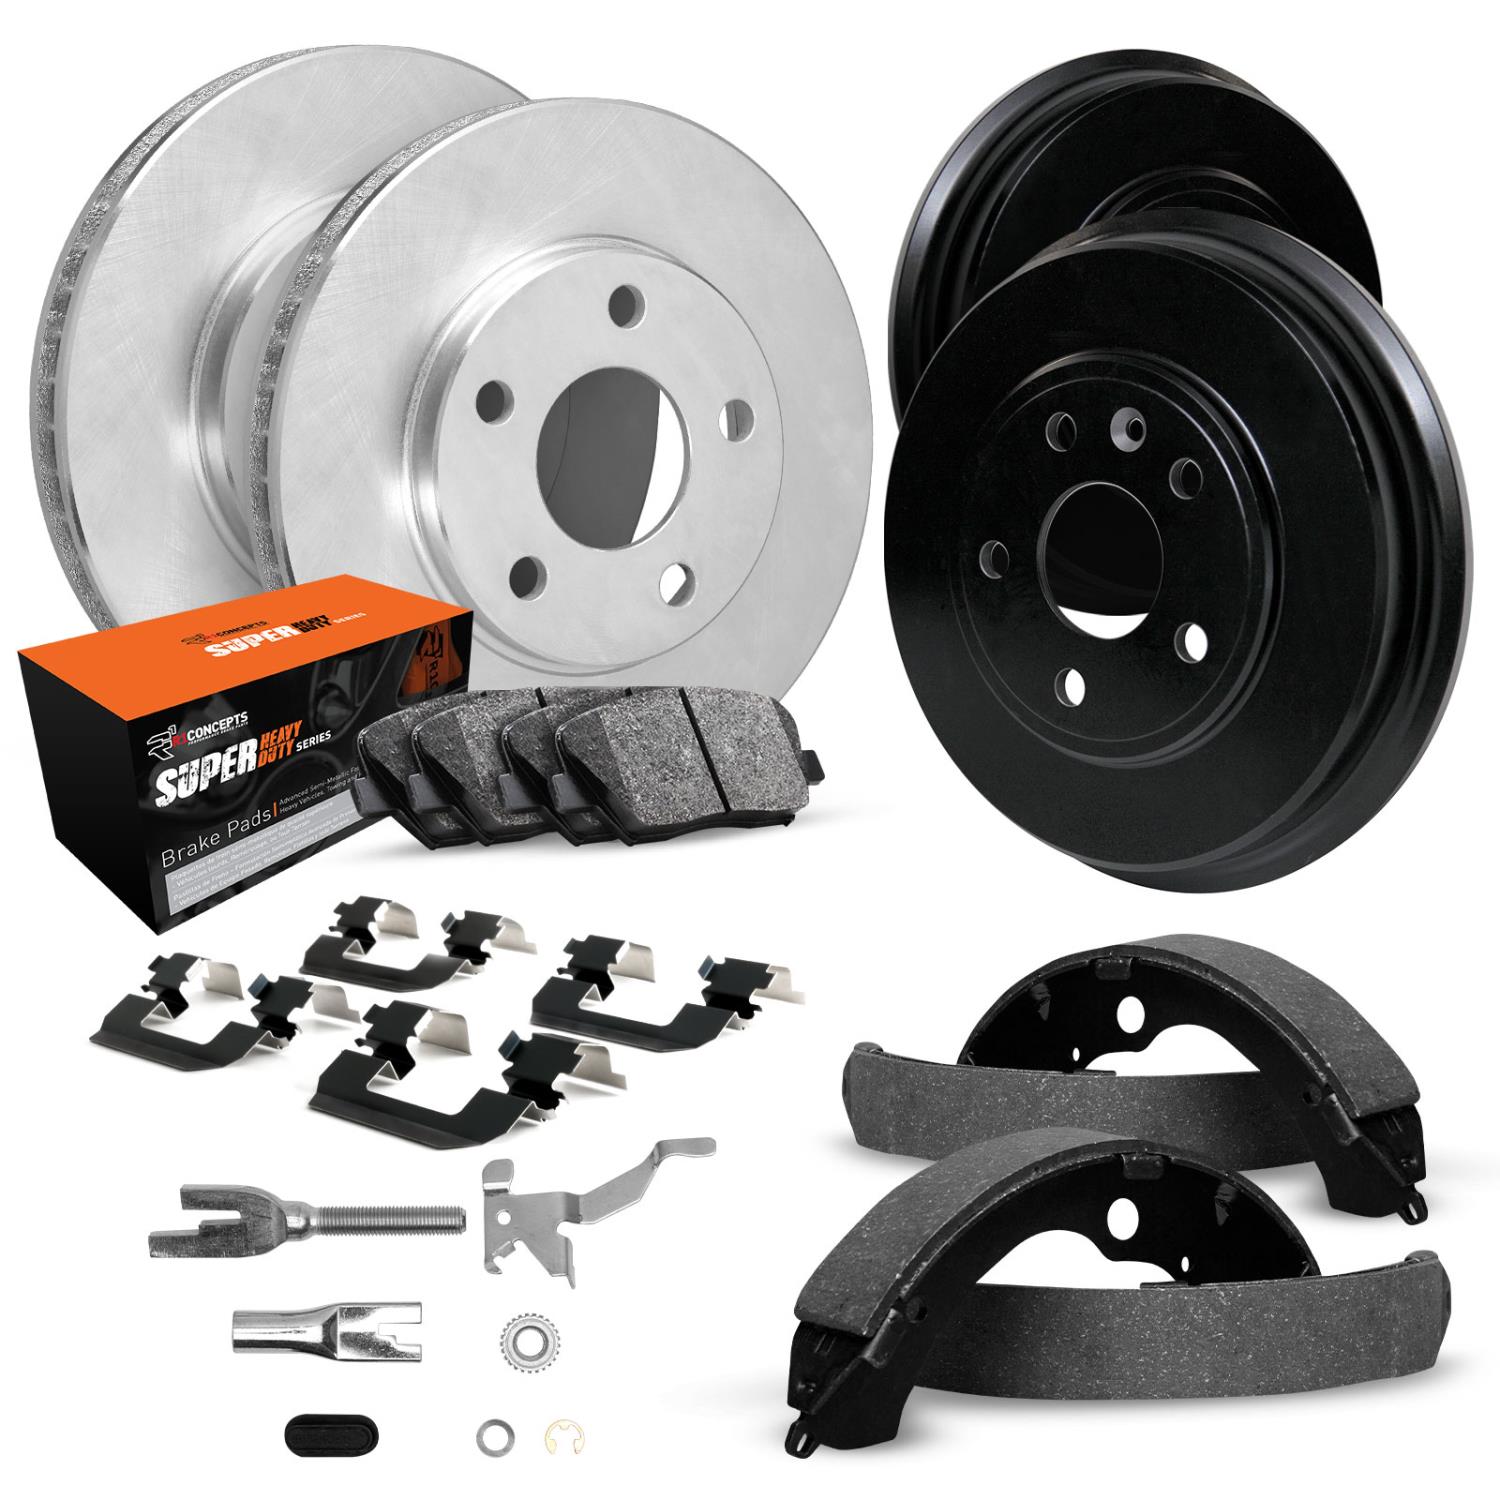 E-Line Blank Brake Rotor & Drum Set w/Super-Duty Pads, Shoes, Hardware, & Adjusters, 1976-1979 Ford/Lincoln/Mercury/Mazda